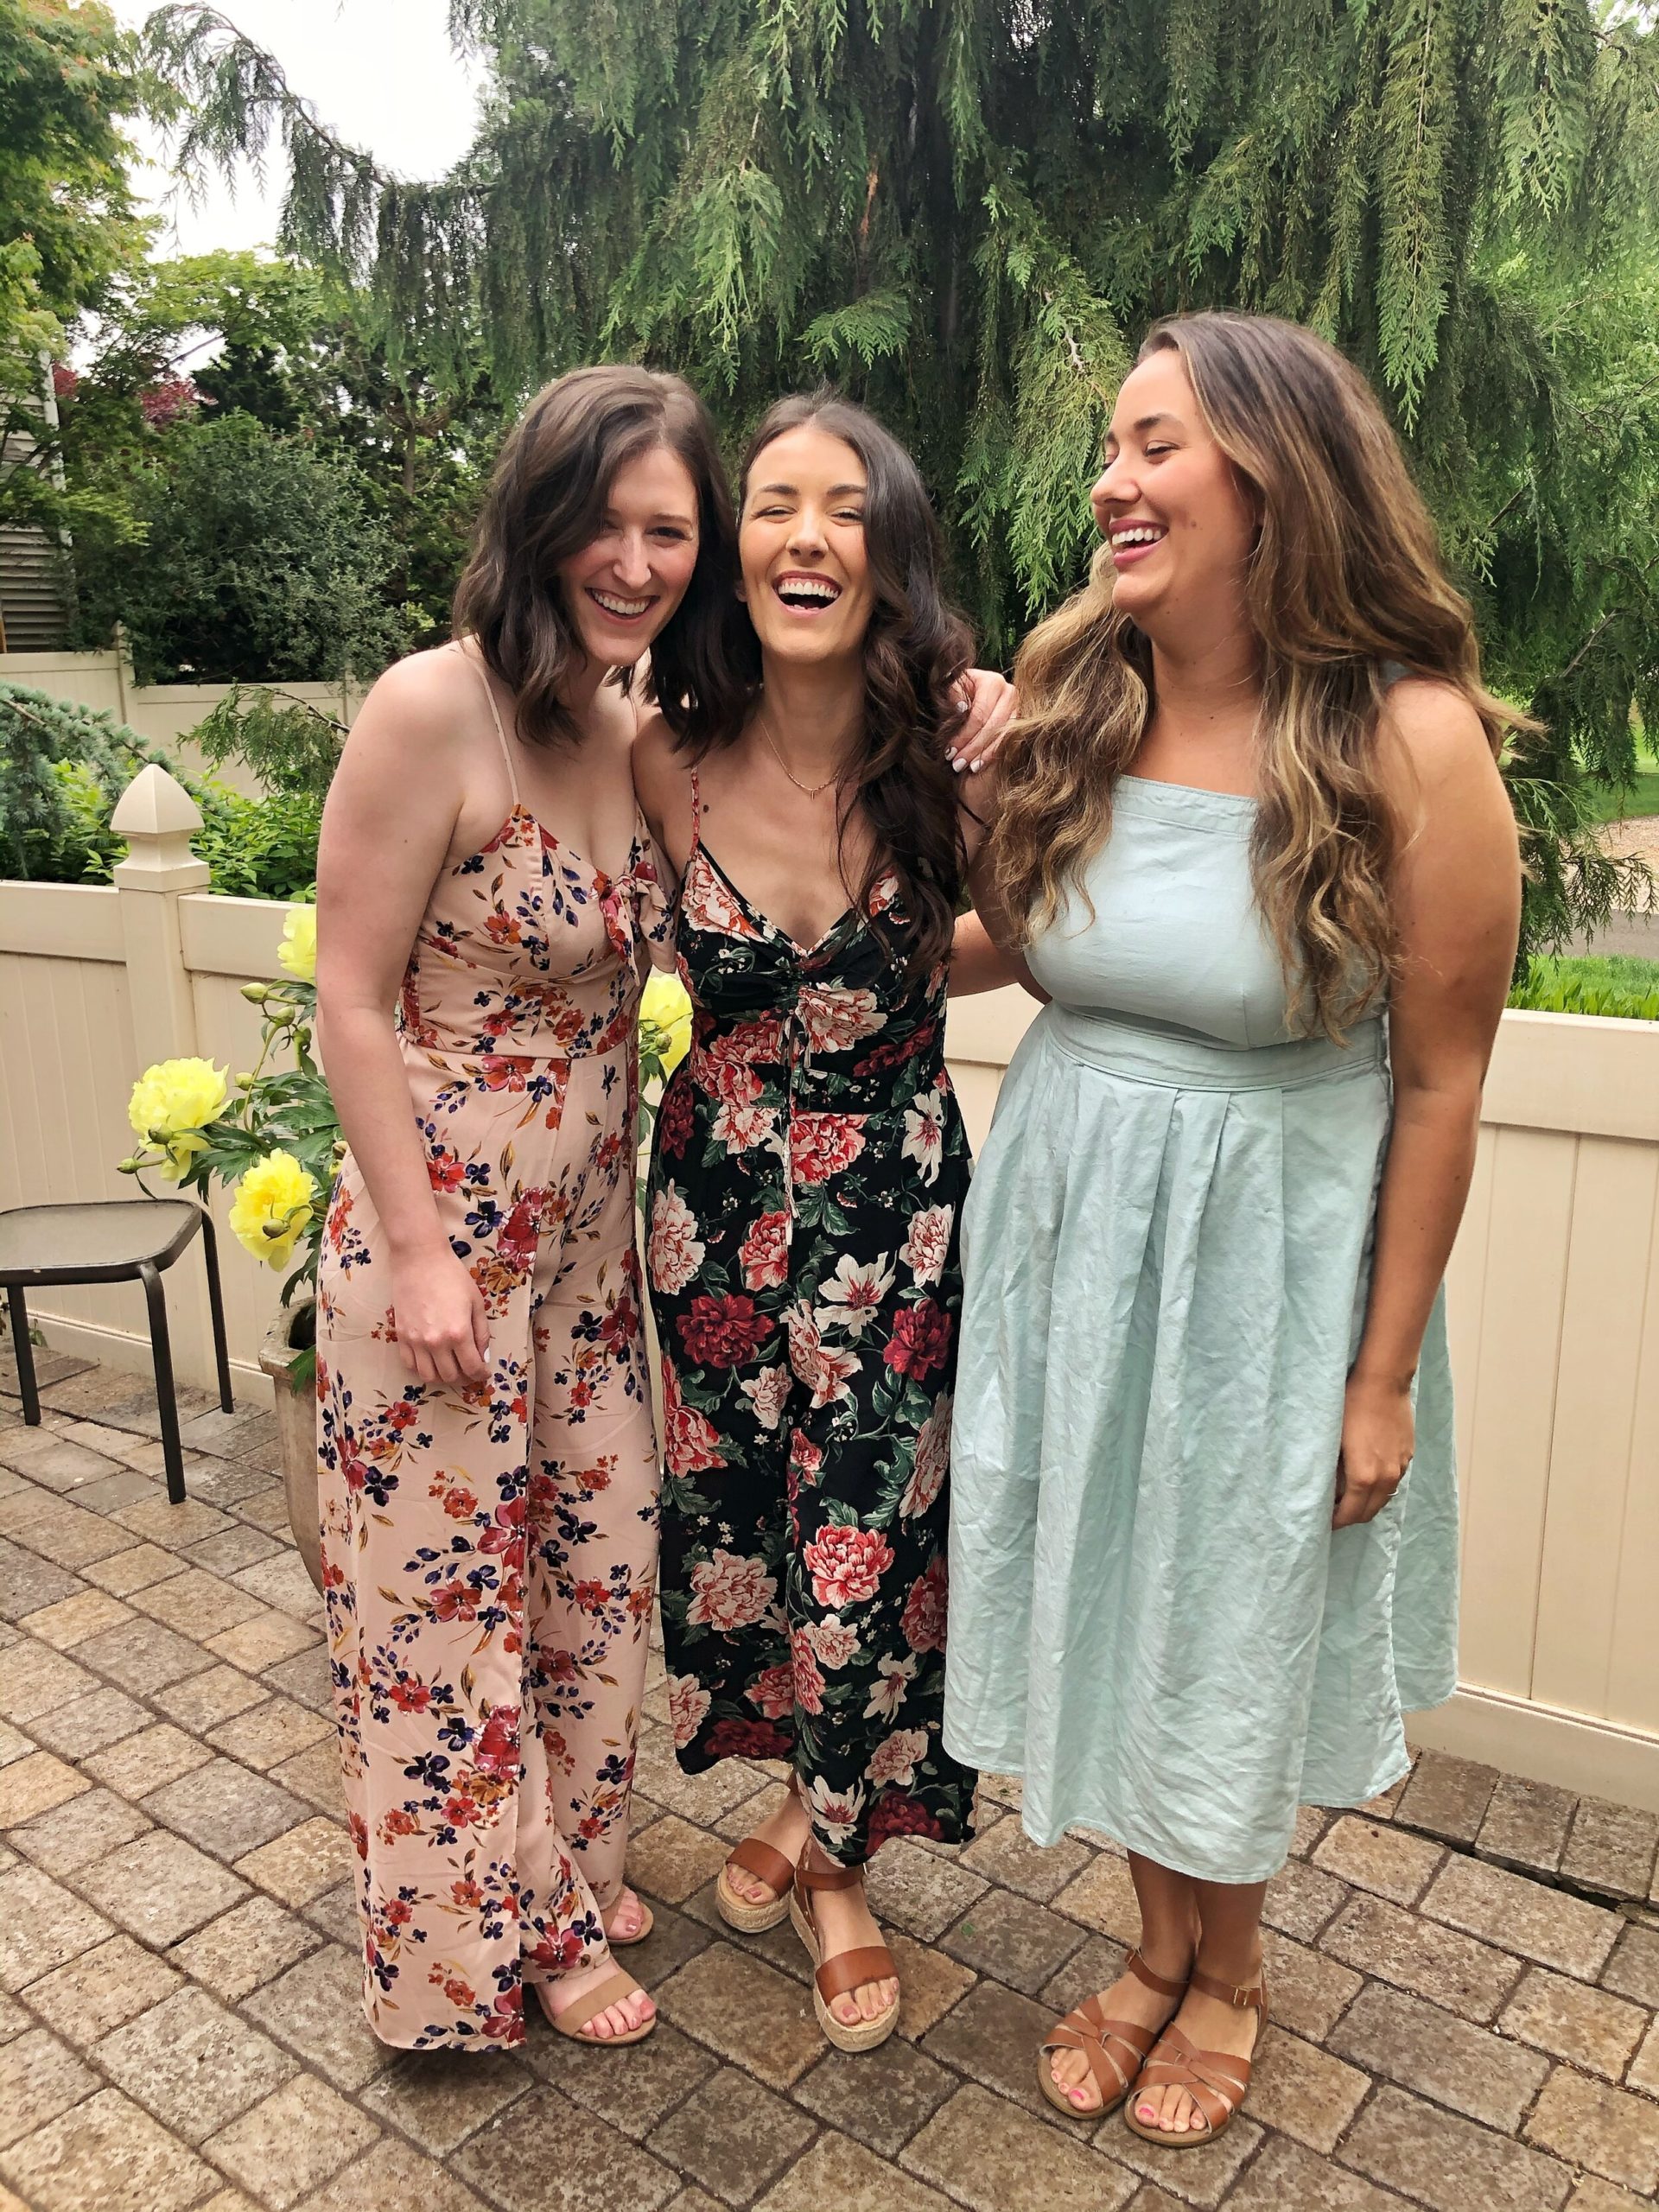 Above, my sisters and I at my at-home bridal shower.